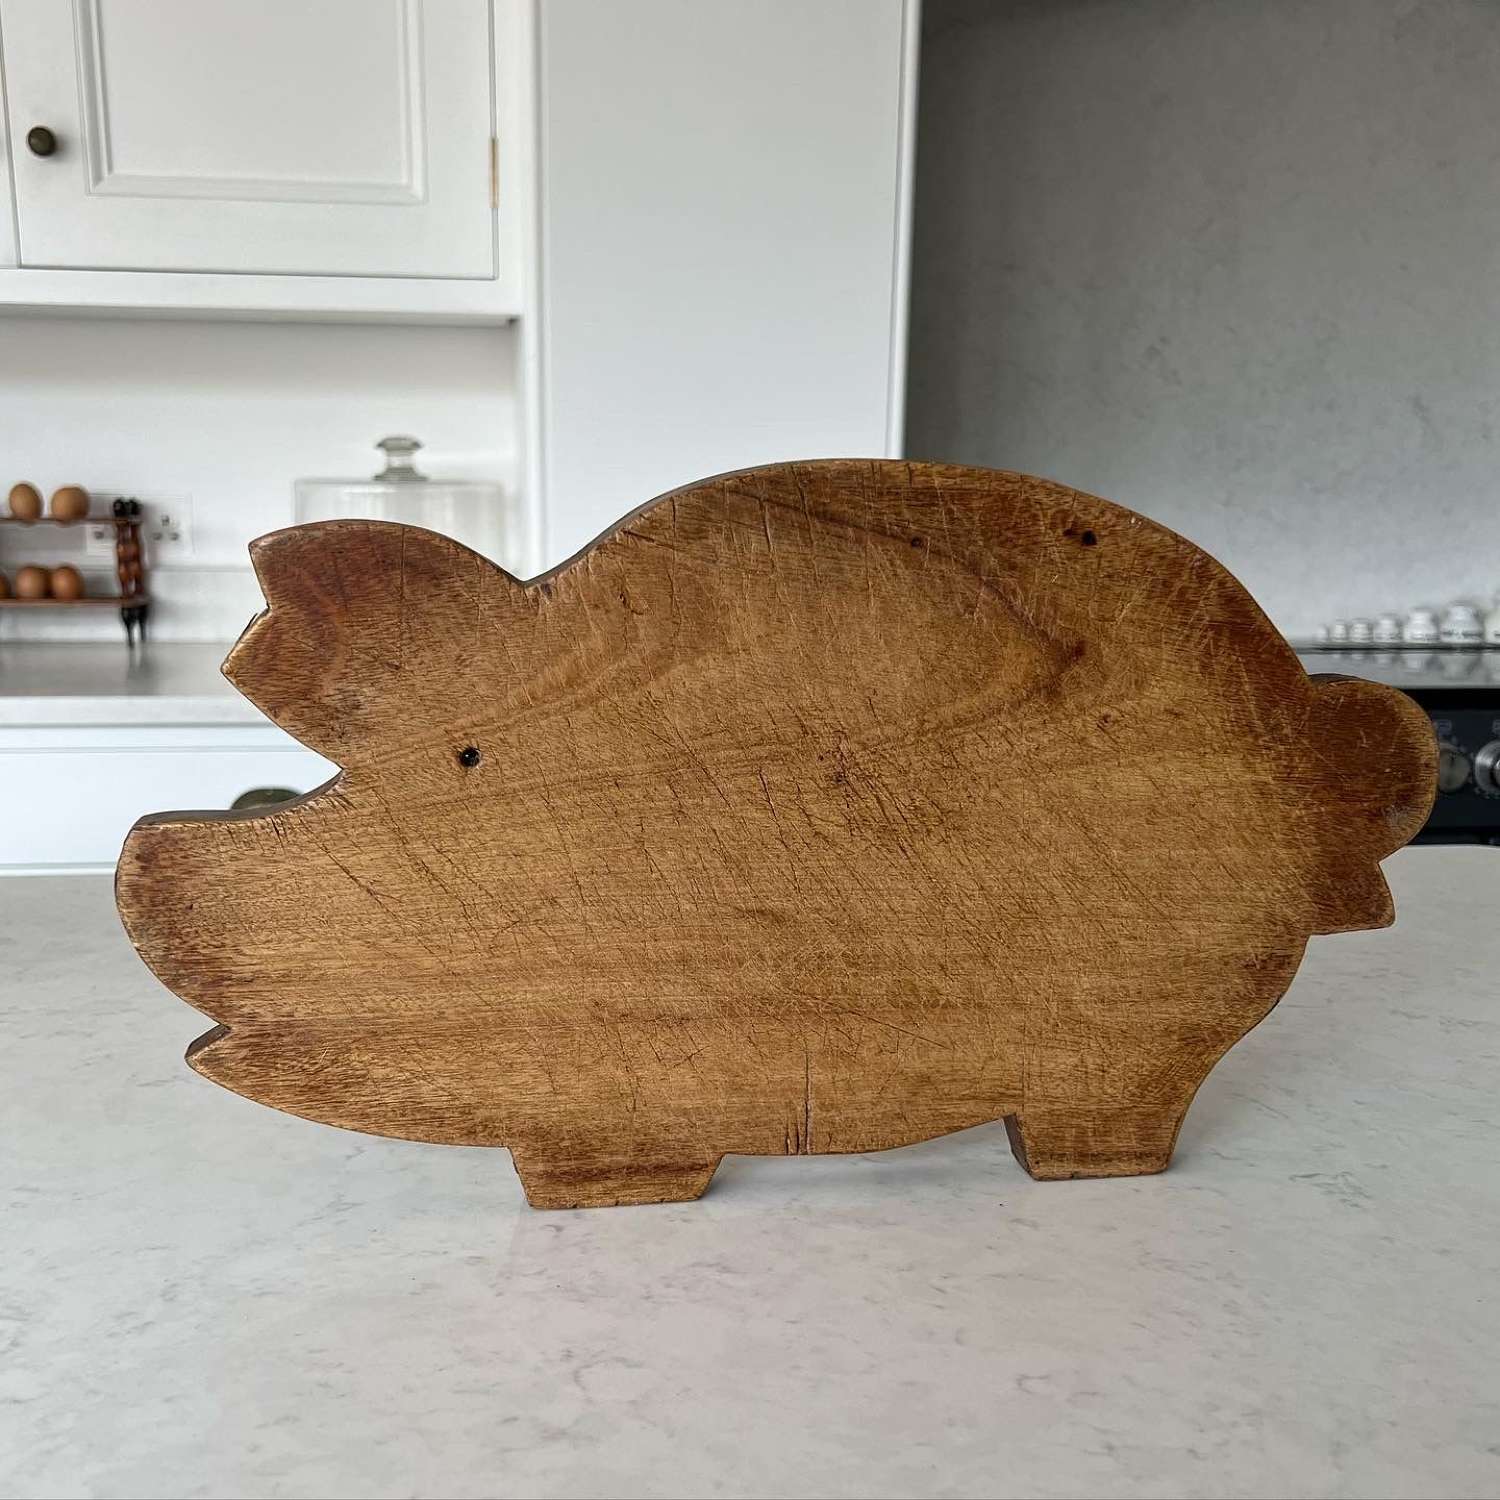 Antique Great Size Pig Shaped Chopping Board